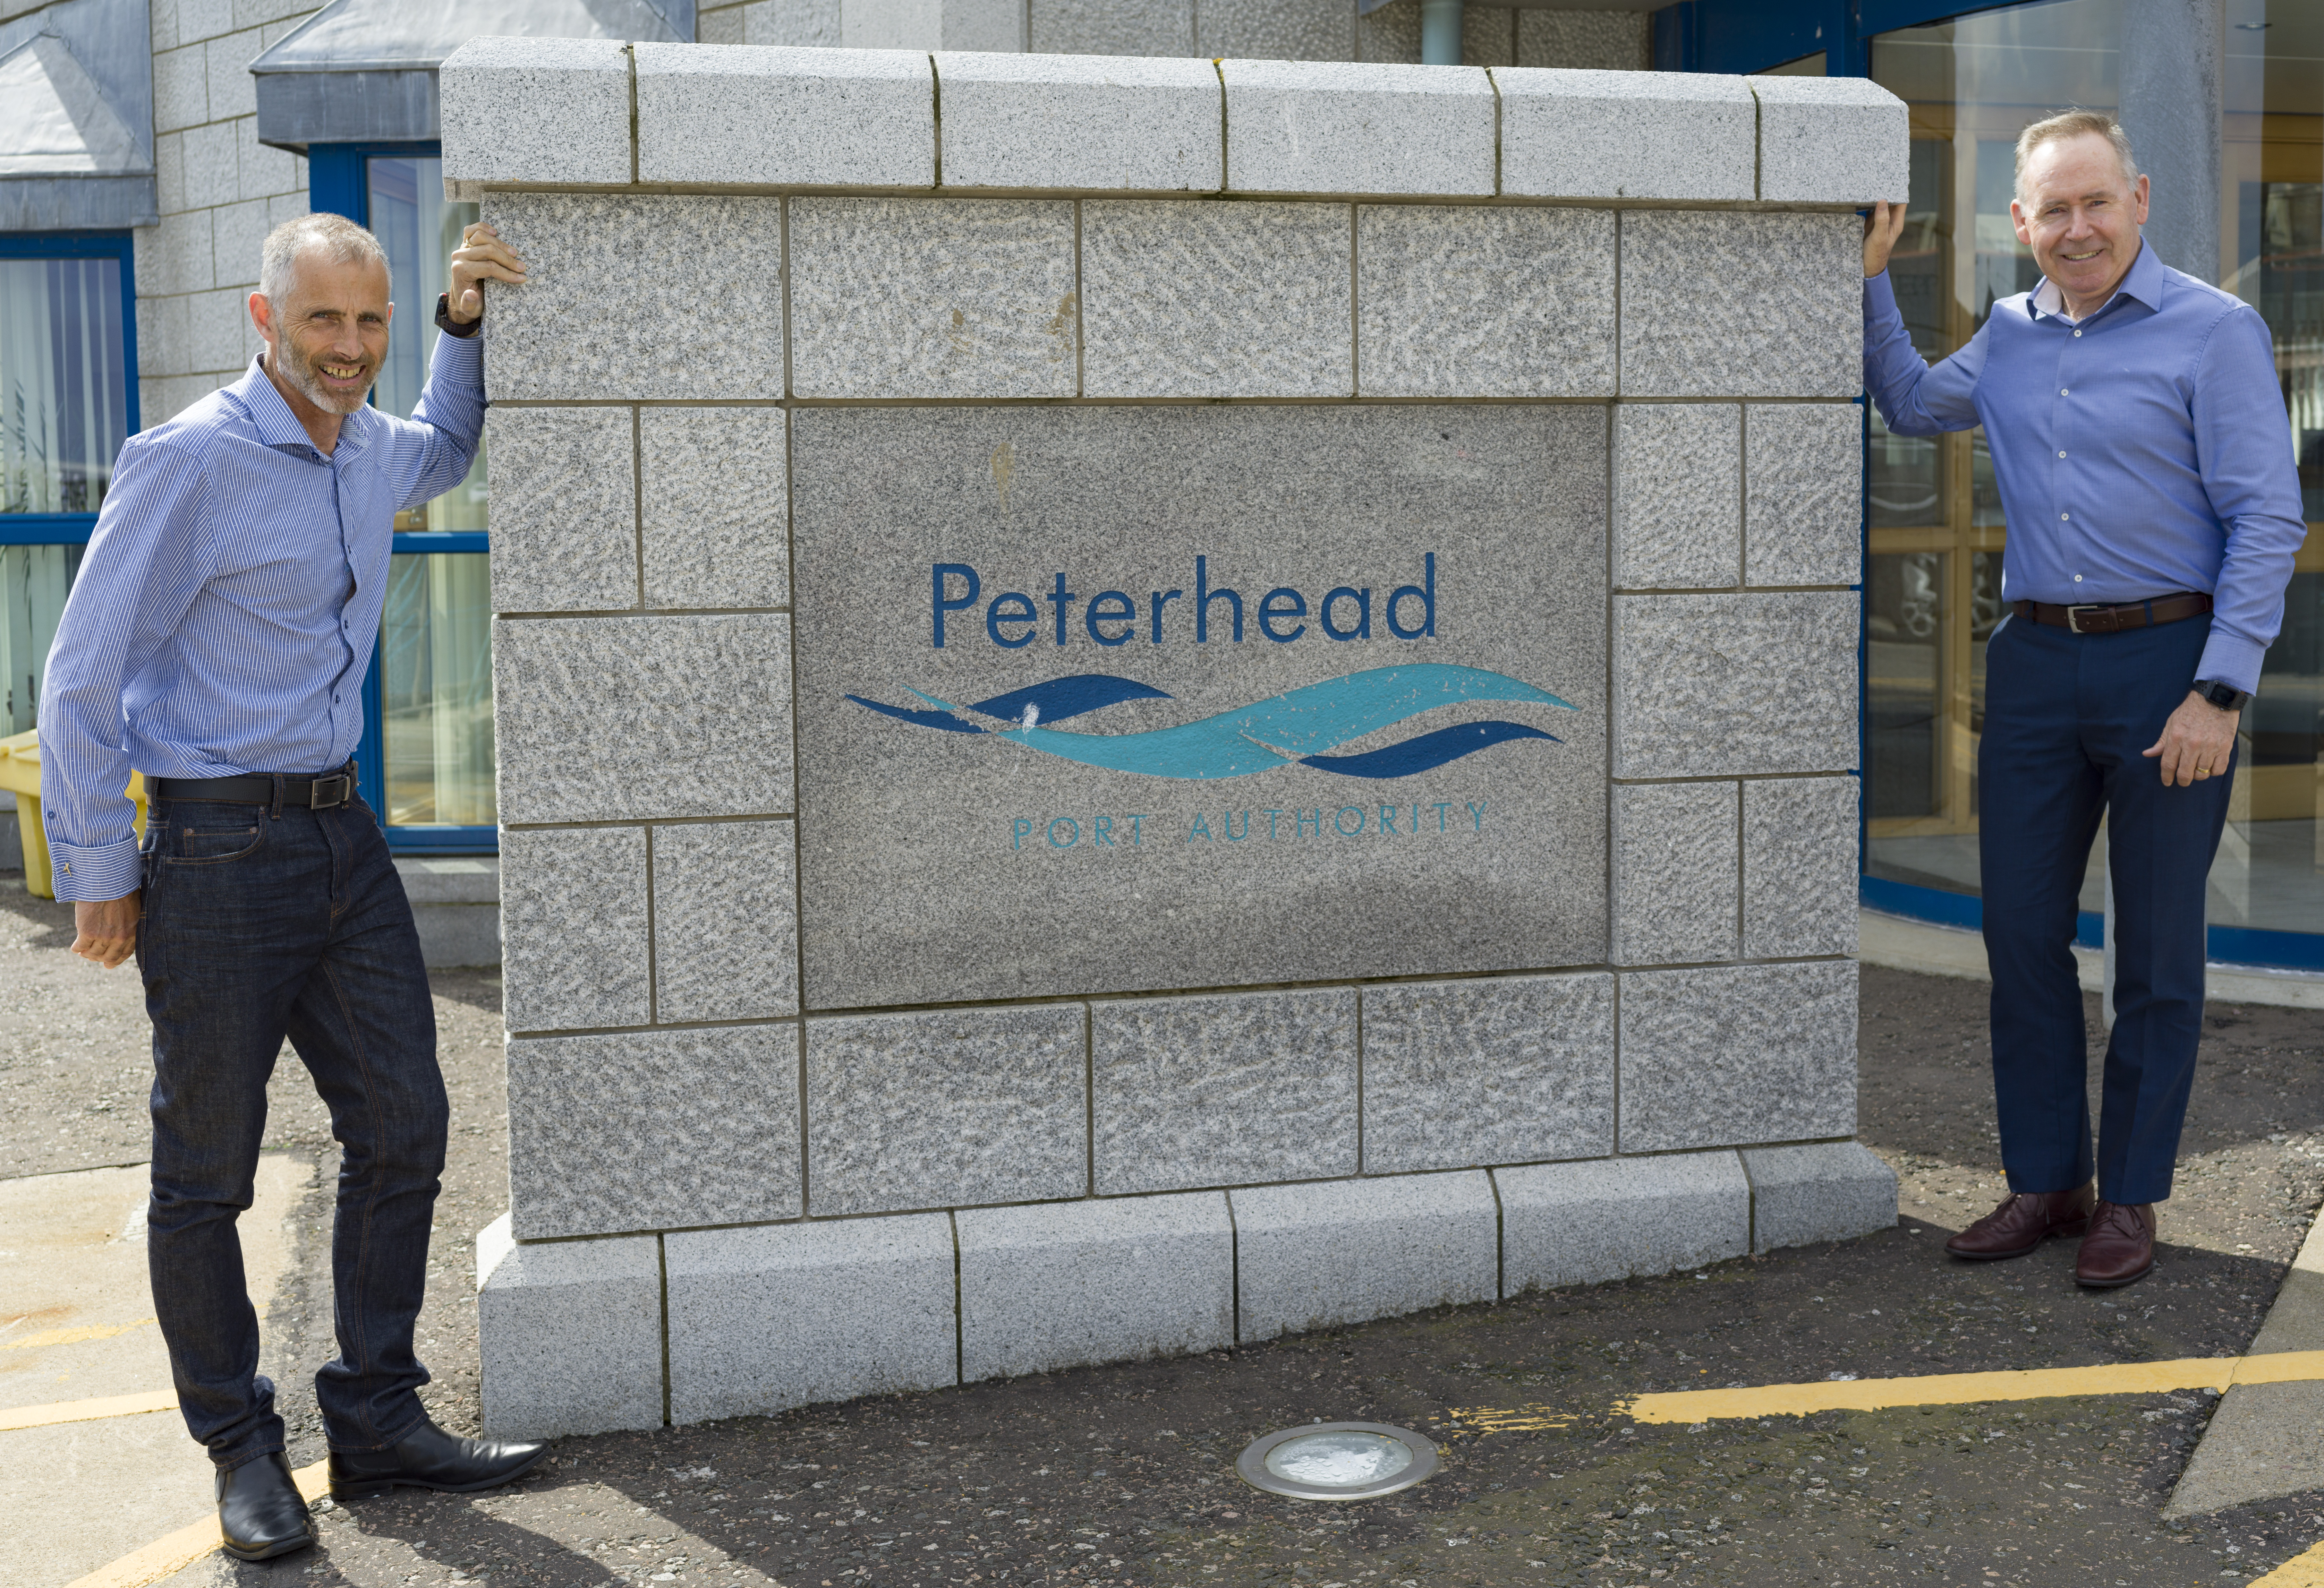 John Pascoe, chairman of Rediscover Peterhead, left, with Simon Brebner, chief executive of Peterhead Port Authority which will be sponsoring two years of the Seafood Festival